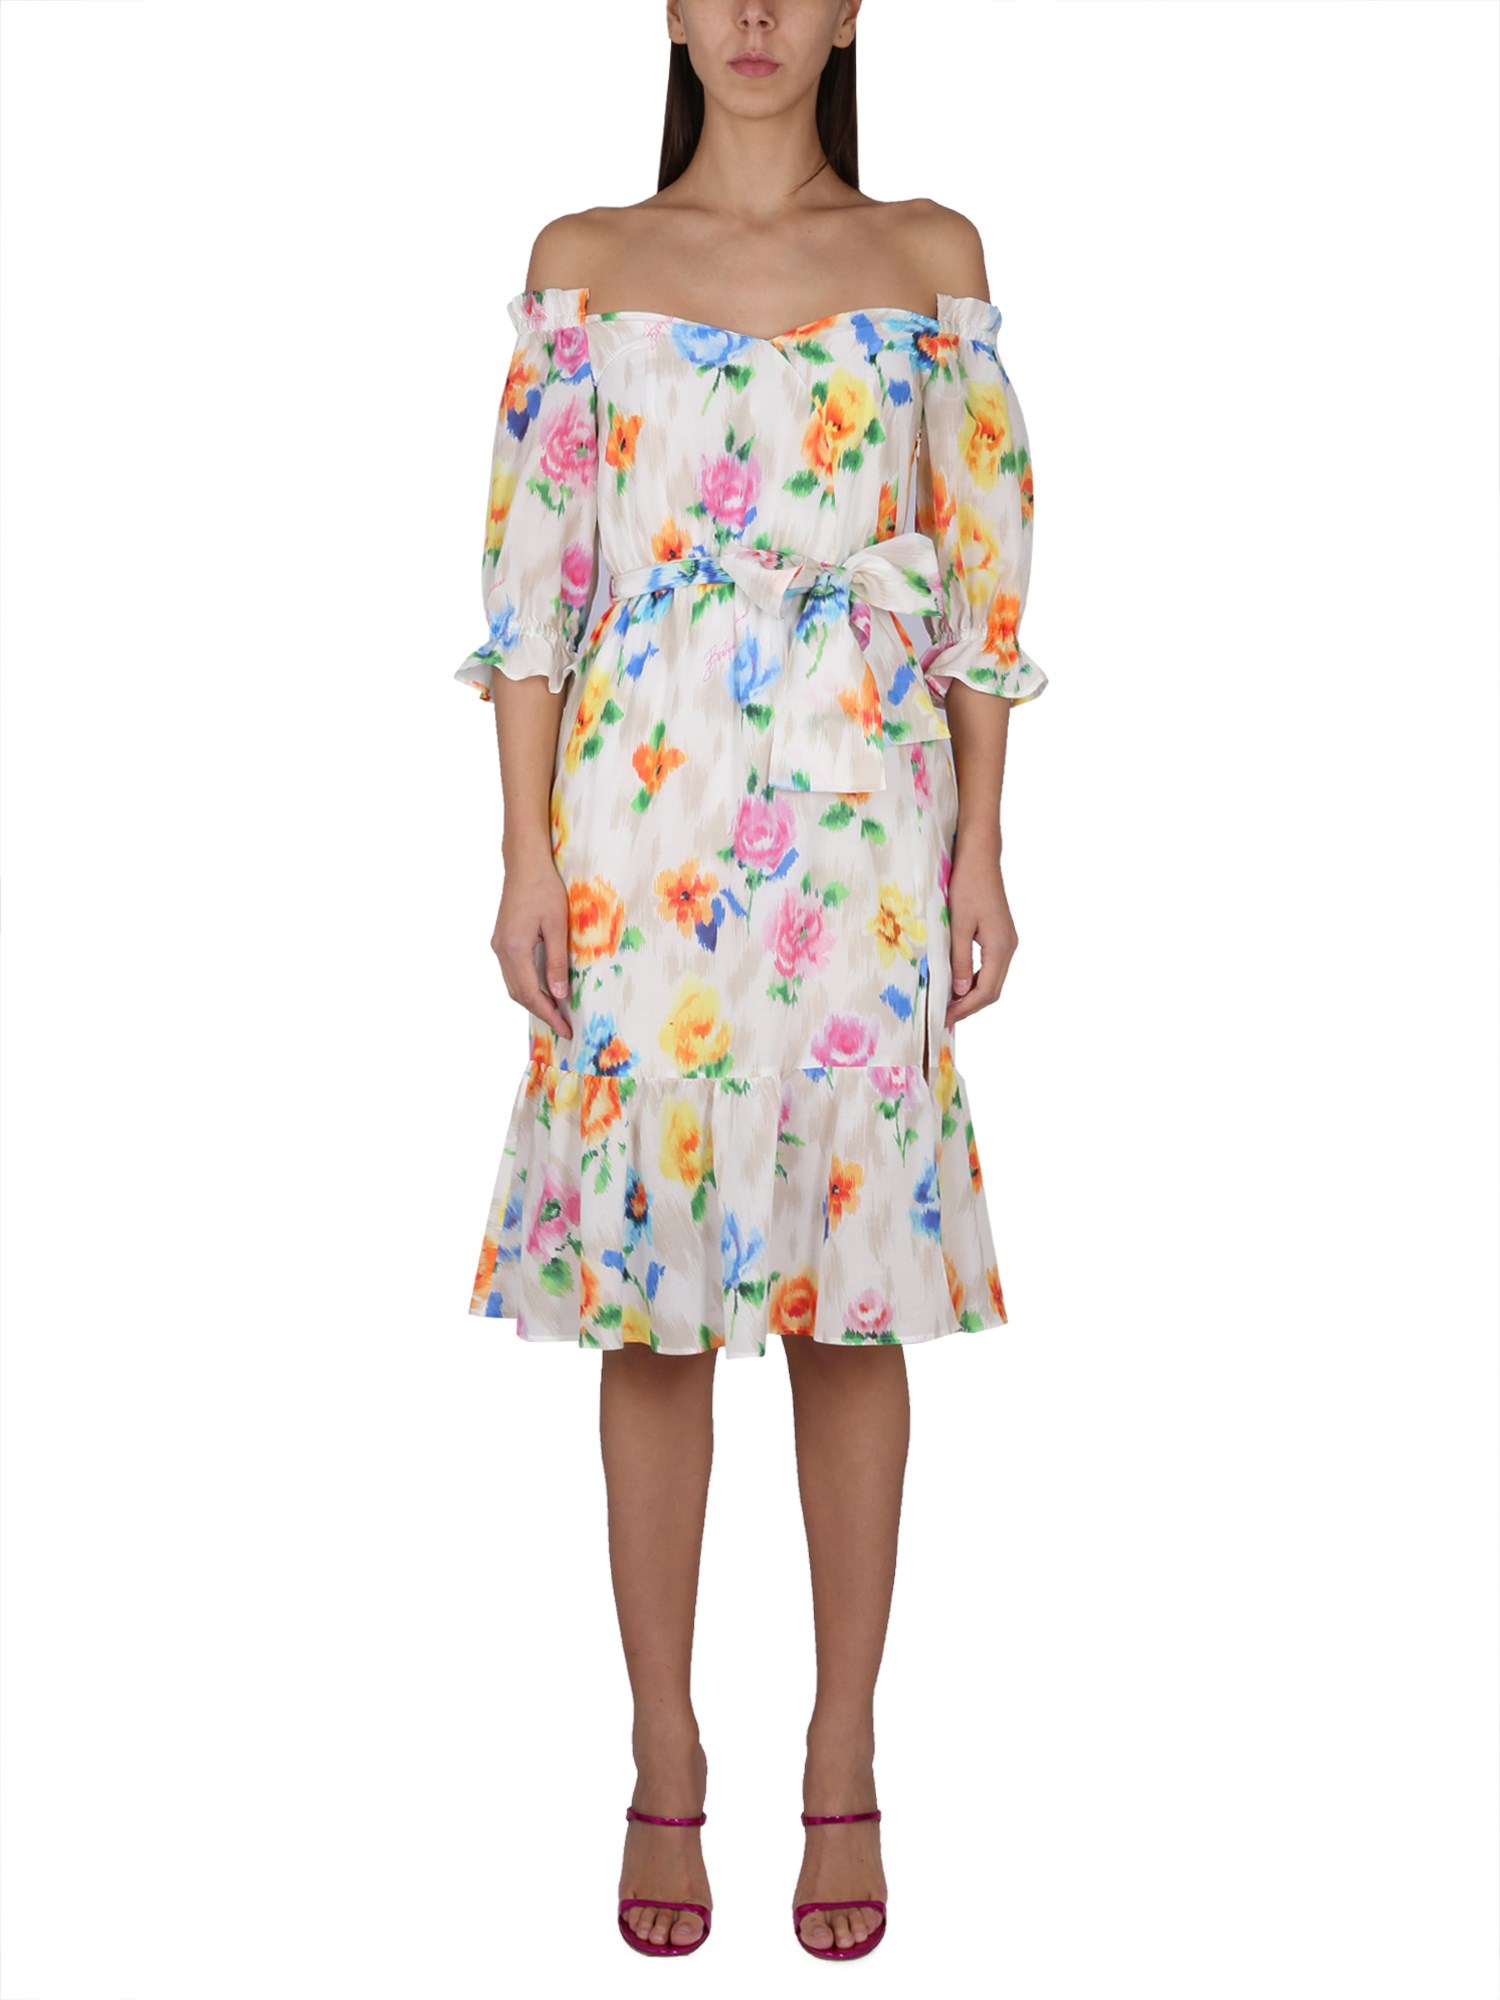 Boutique Moschino boutique moschino dress with floral pattern